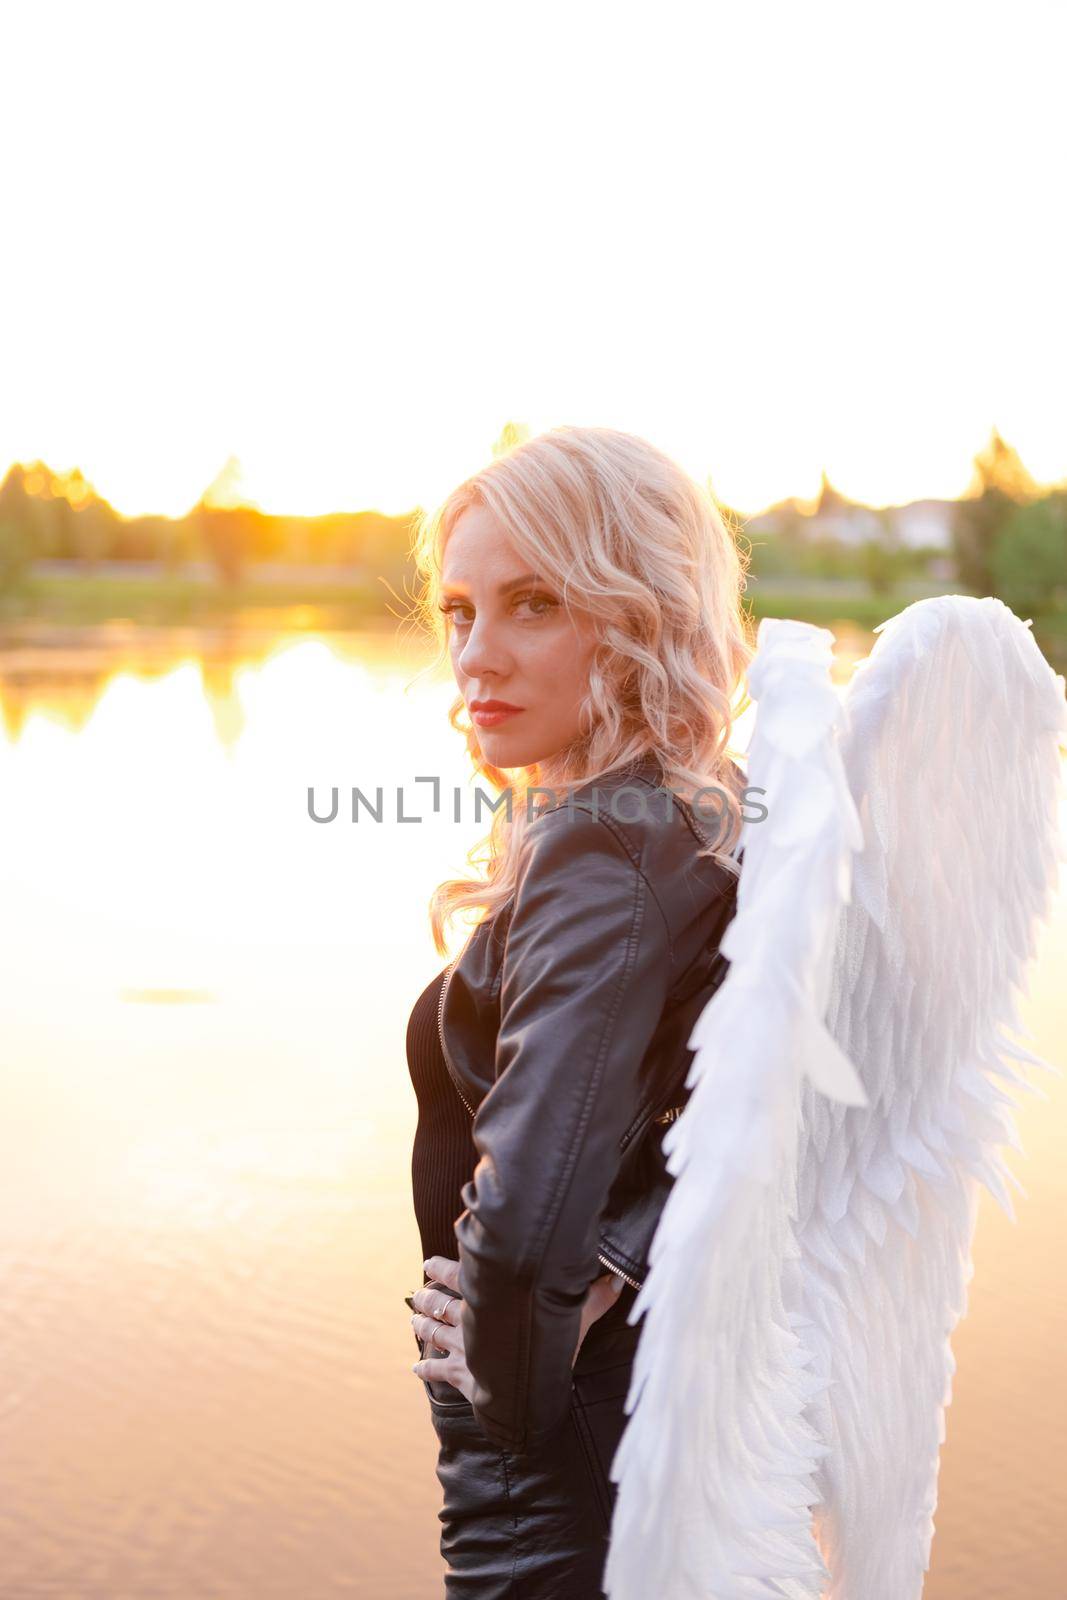 sexy blonde woman in black leather jacket and shorts with white angel wings. demon or angel in hell or heaven. sunset near lake.